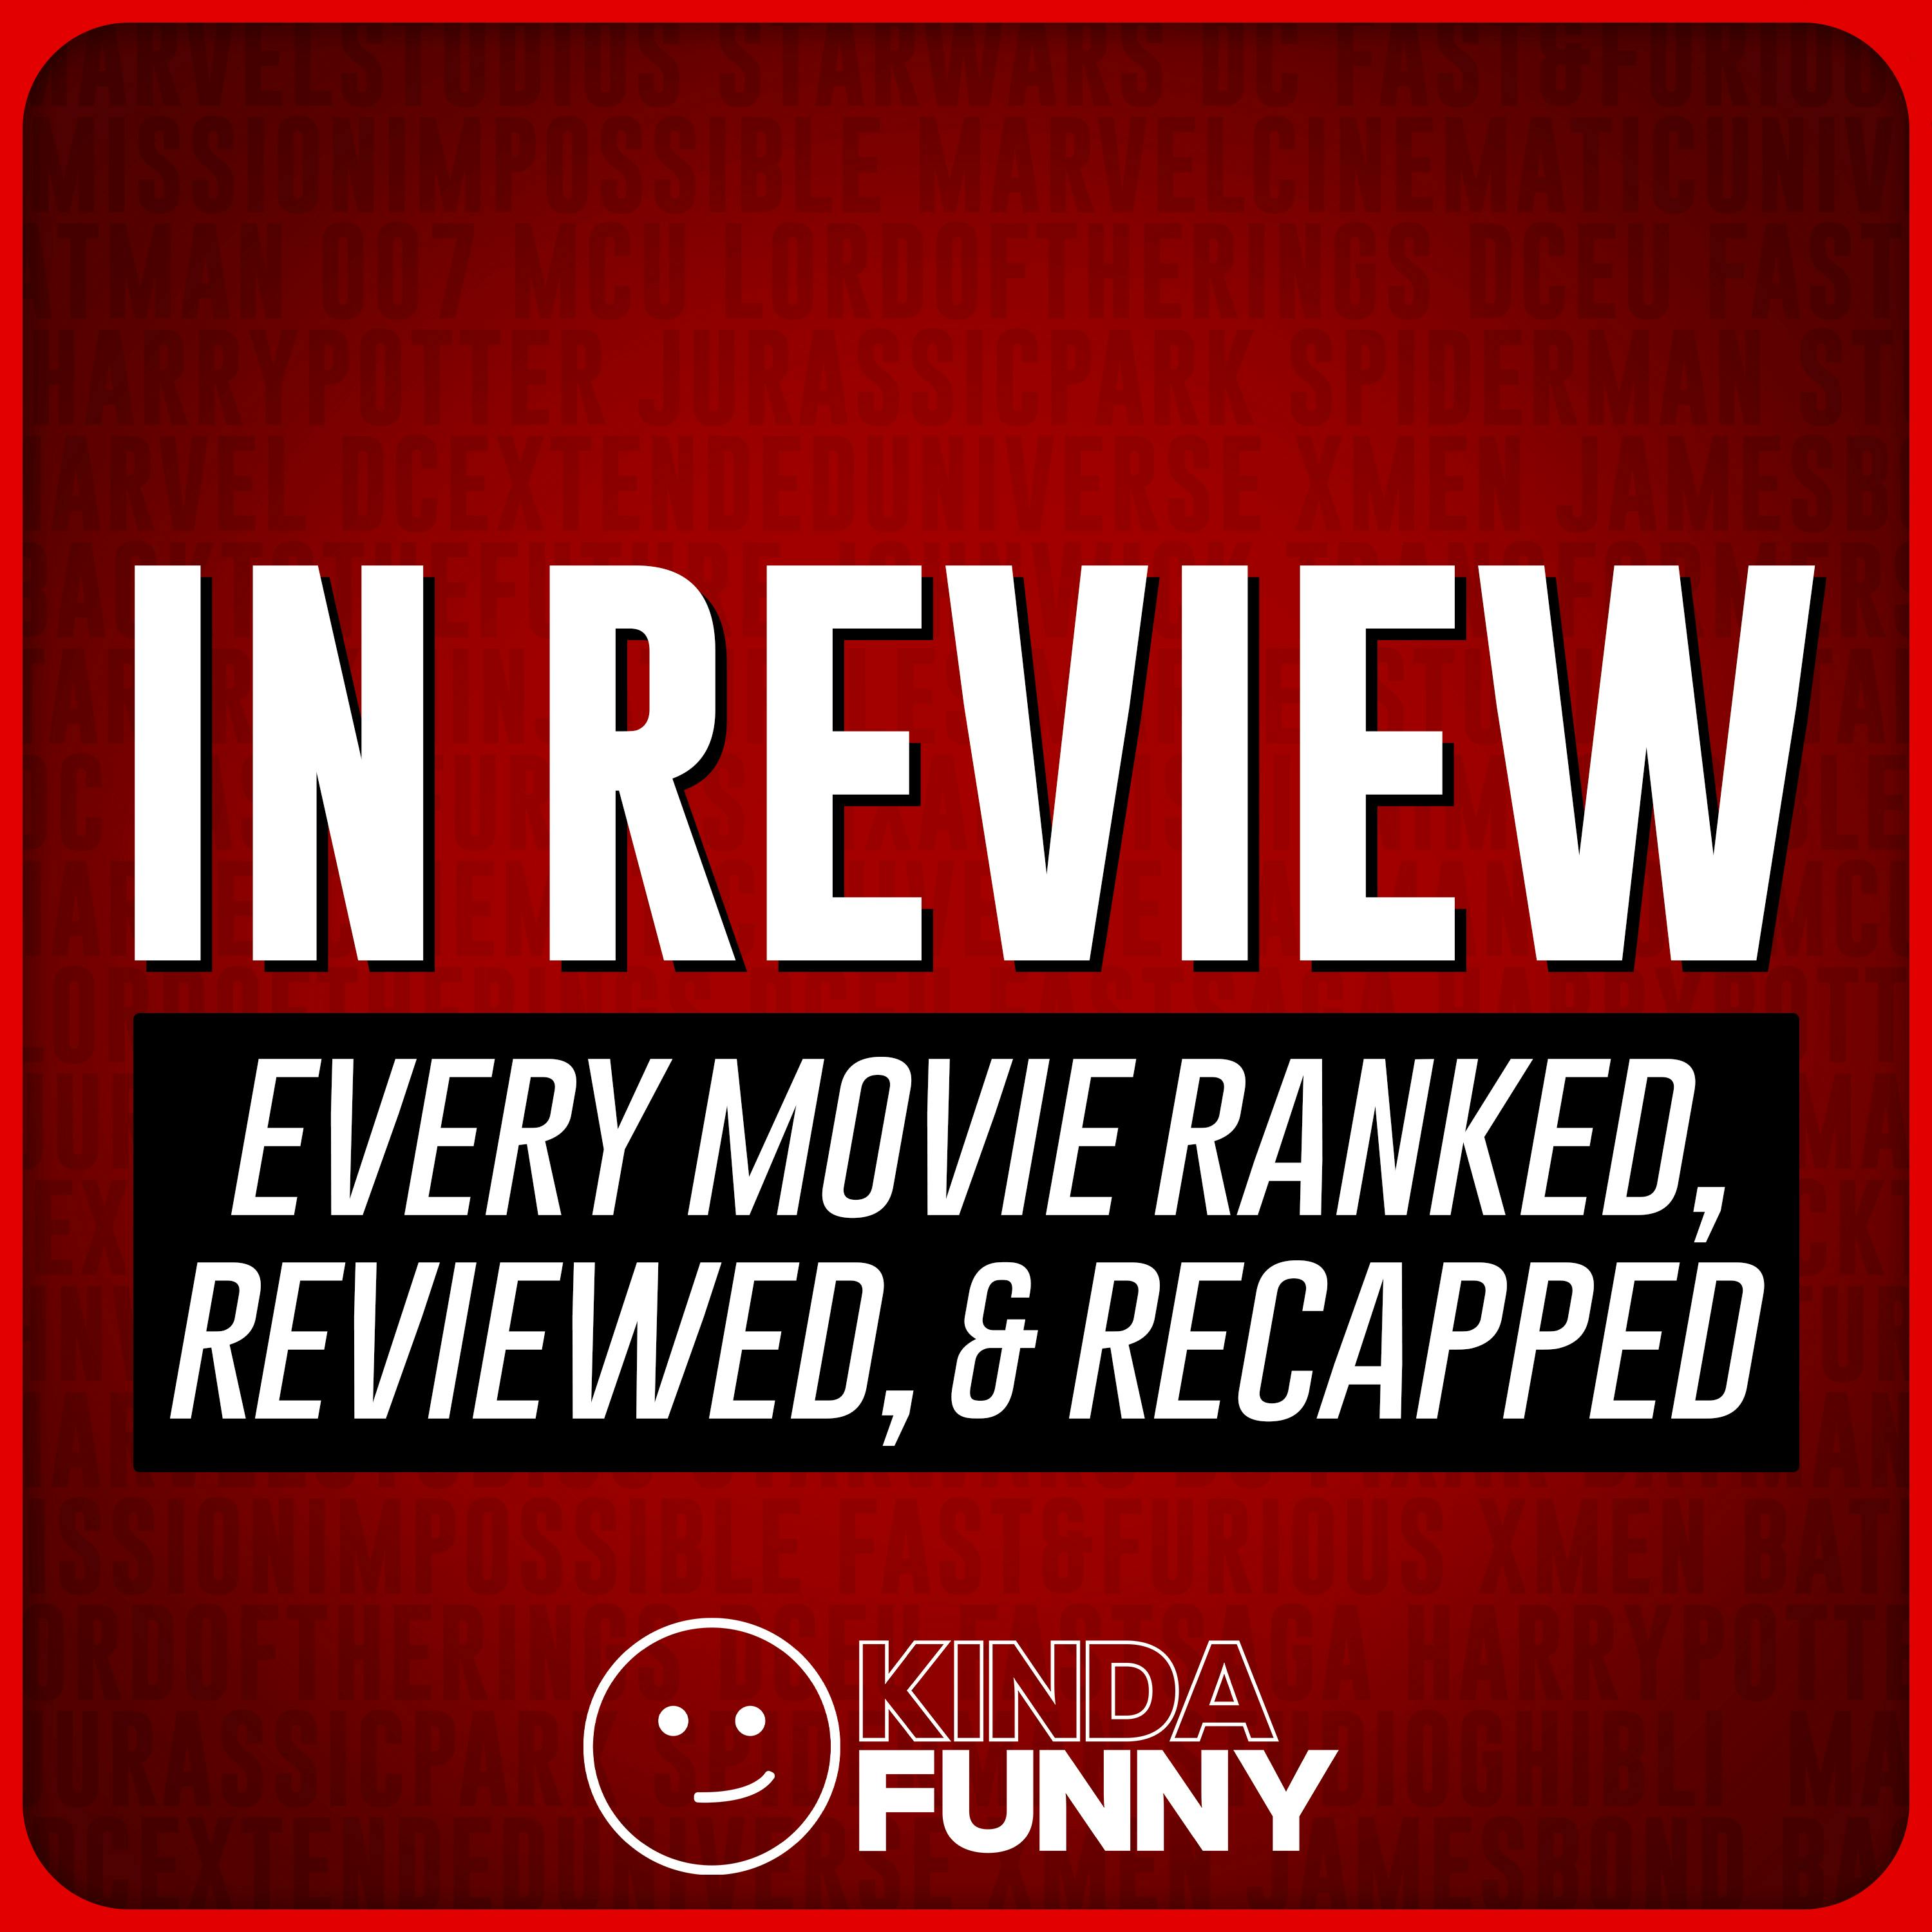 In Review: Movies Ranked, Reviewed, & Recapped – A Kinda Funny Film & TV Podcast podcast